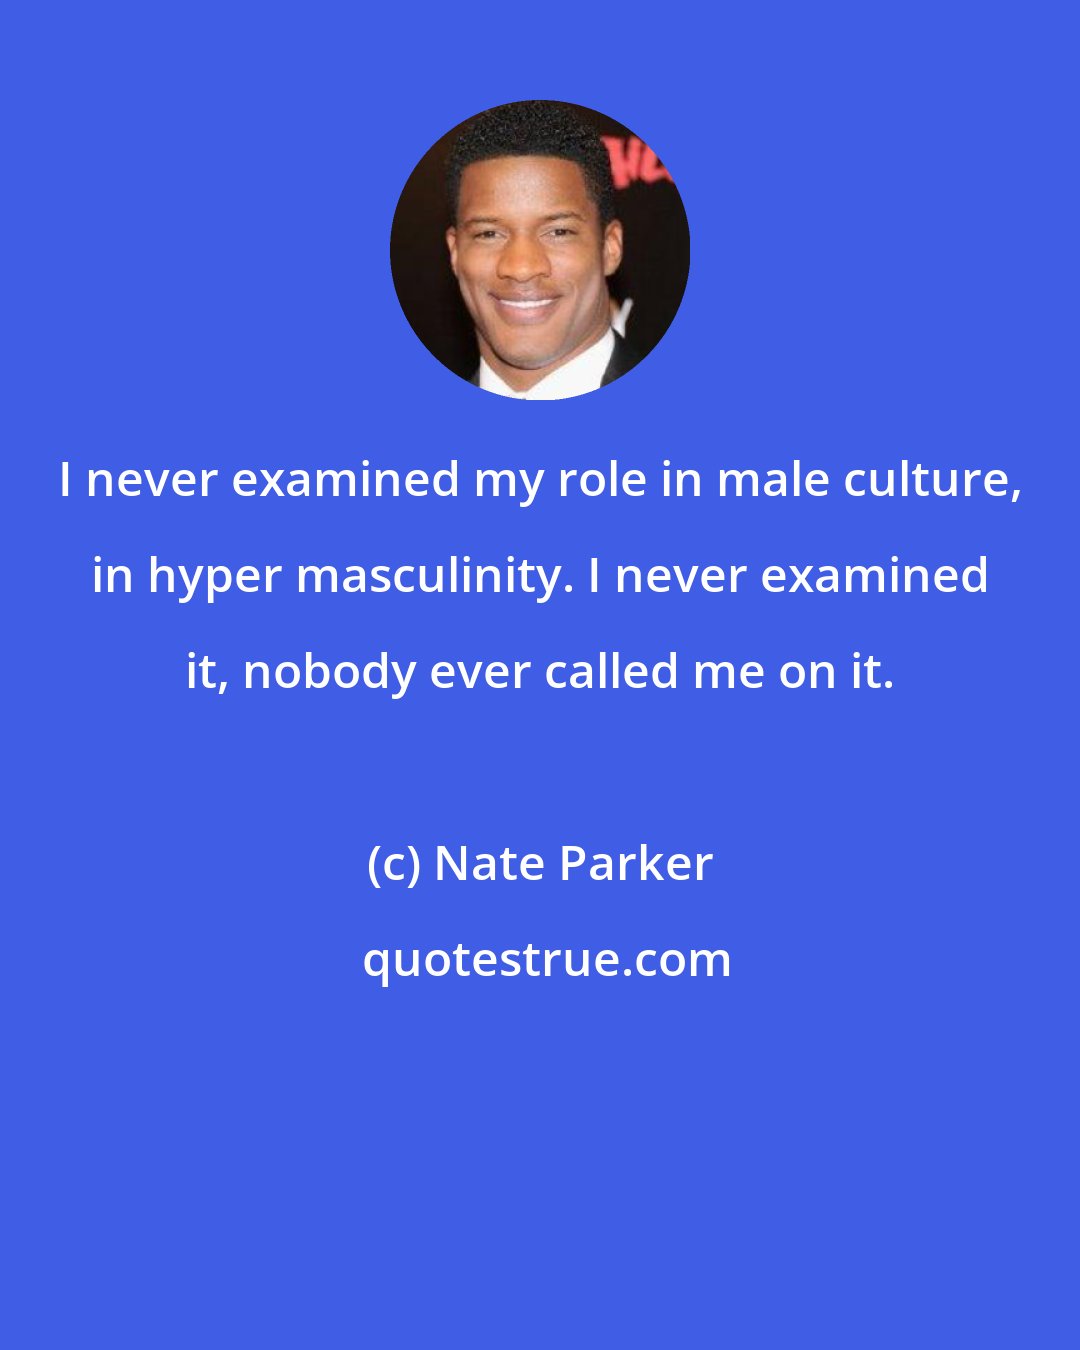 Nate Parker: I never examined my role in male culture, in hyper masculinity. I never examined it, nobody ever called me on it.